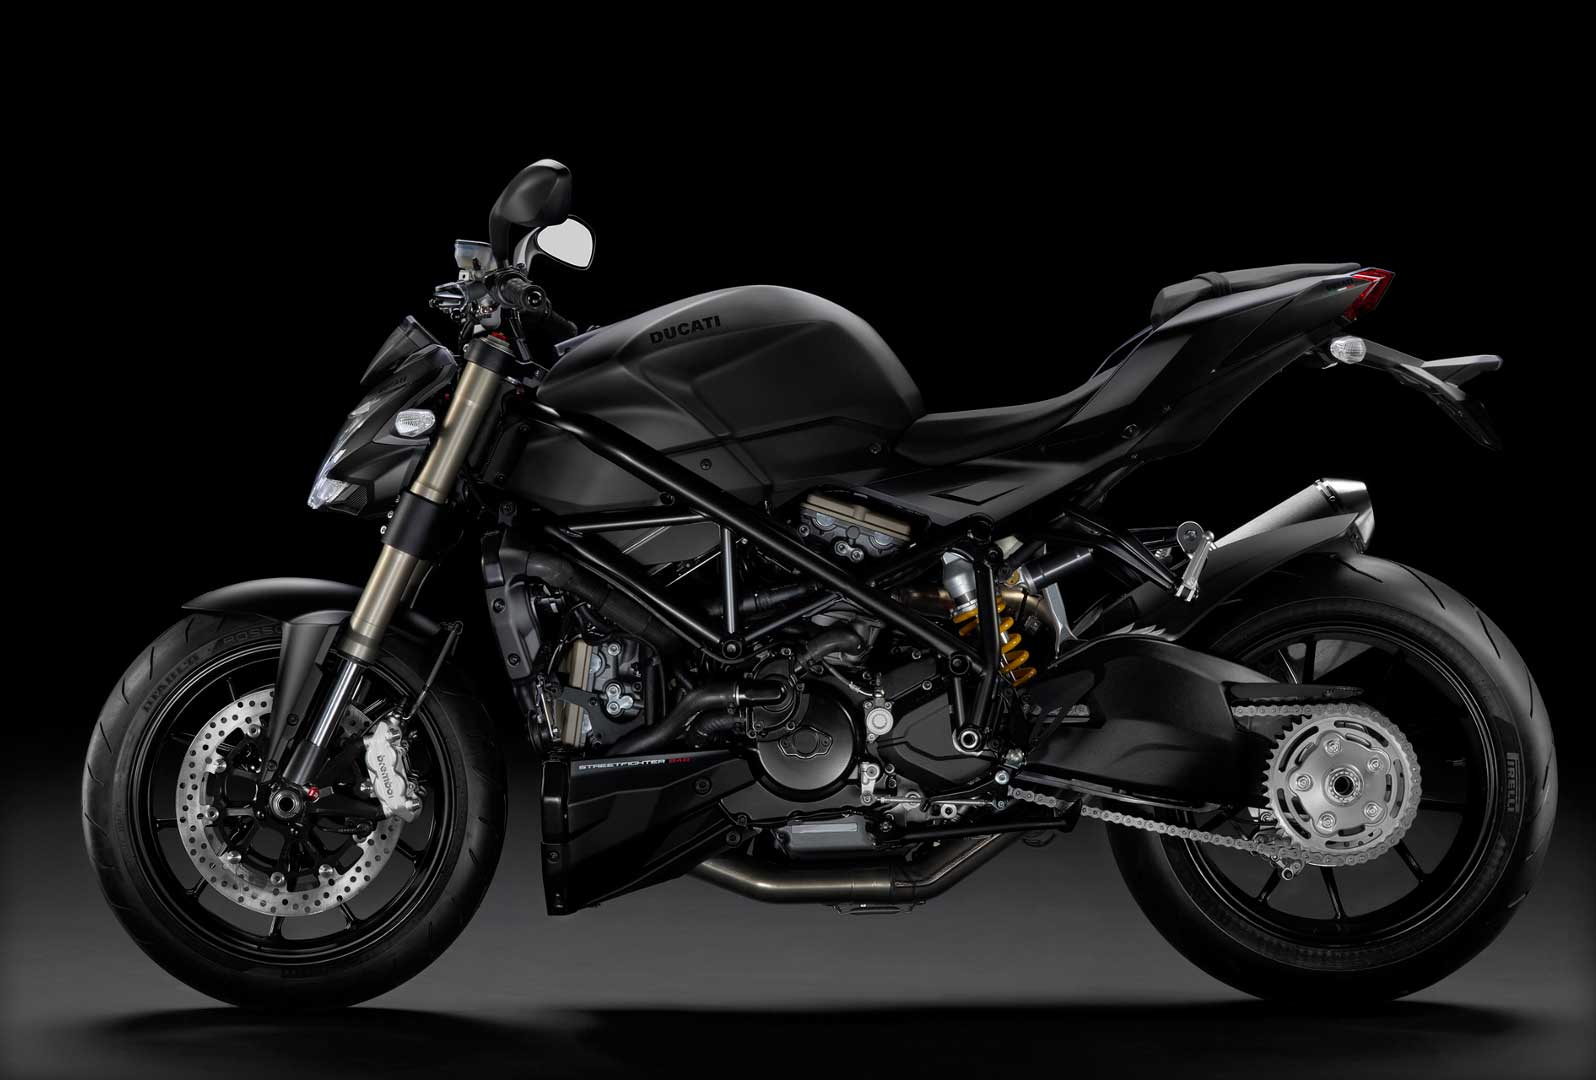 2014 Ducati Streetfighter 848 side view